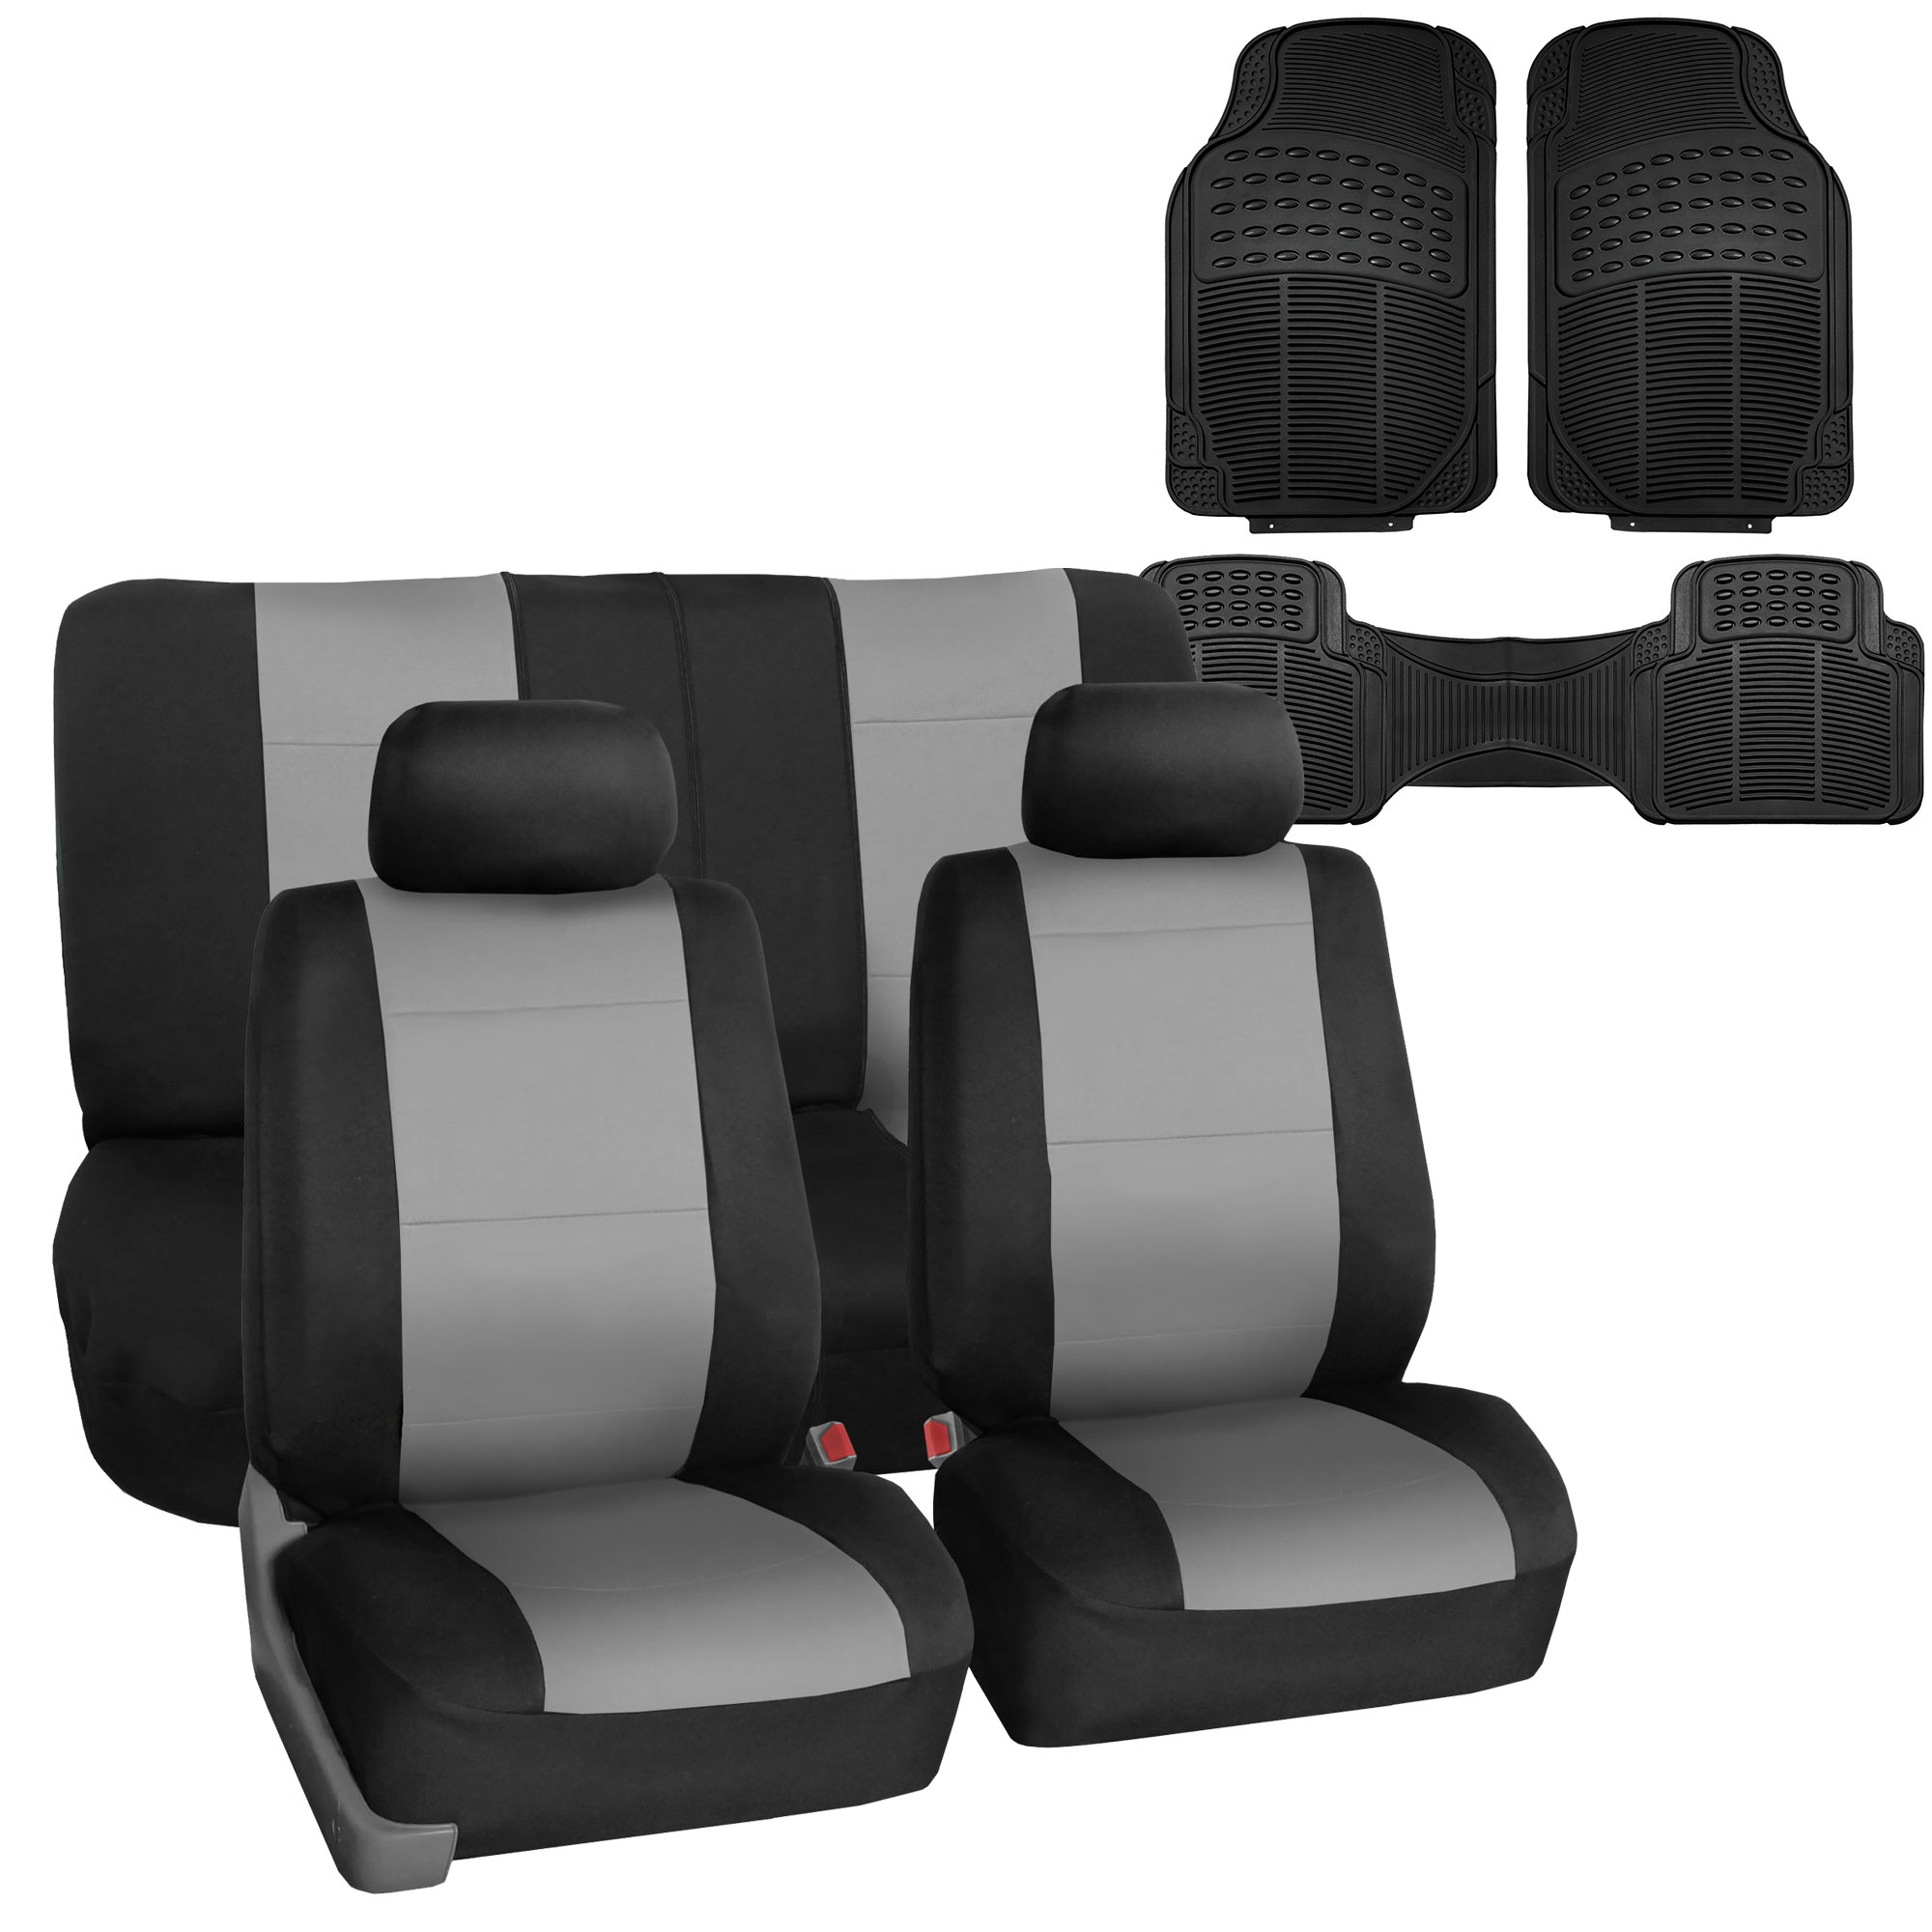 FH Group Neoprene Car Seat Cover Gray Black Combo w/ Black Floor Mats for Auto